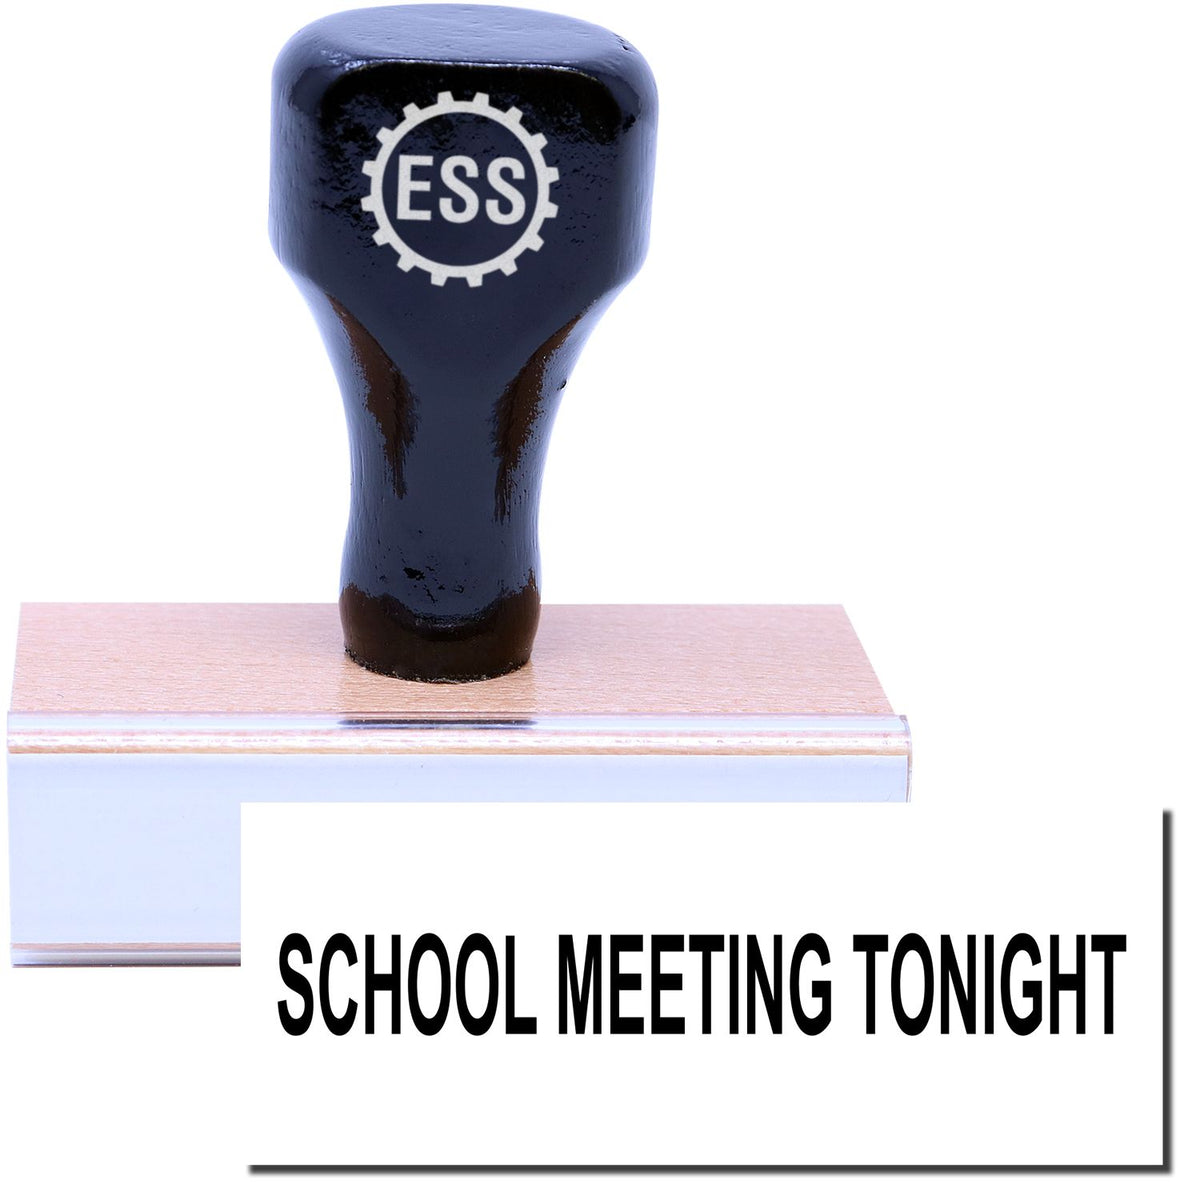 A stock office rubber stamp with a stamped image showing how the text &quot;SCHOOL MEETING TONIGHT&quot; in a large font is displayed after stamping.